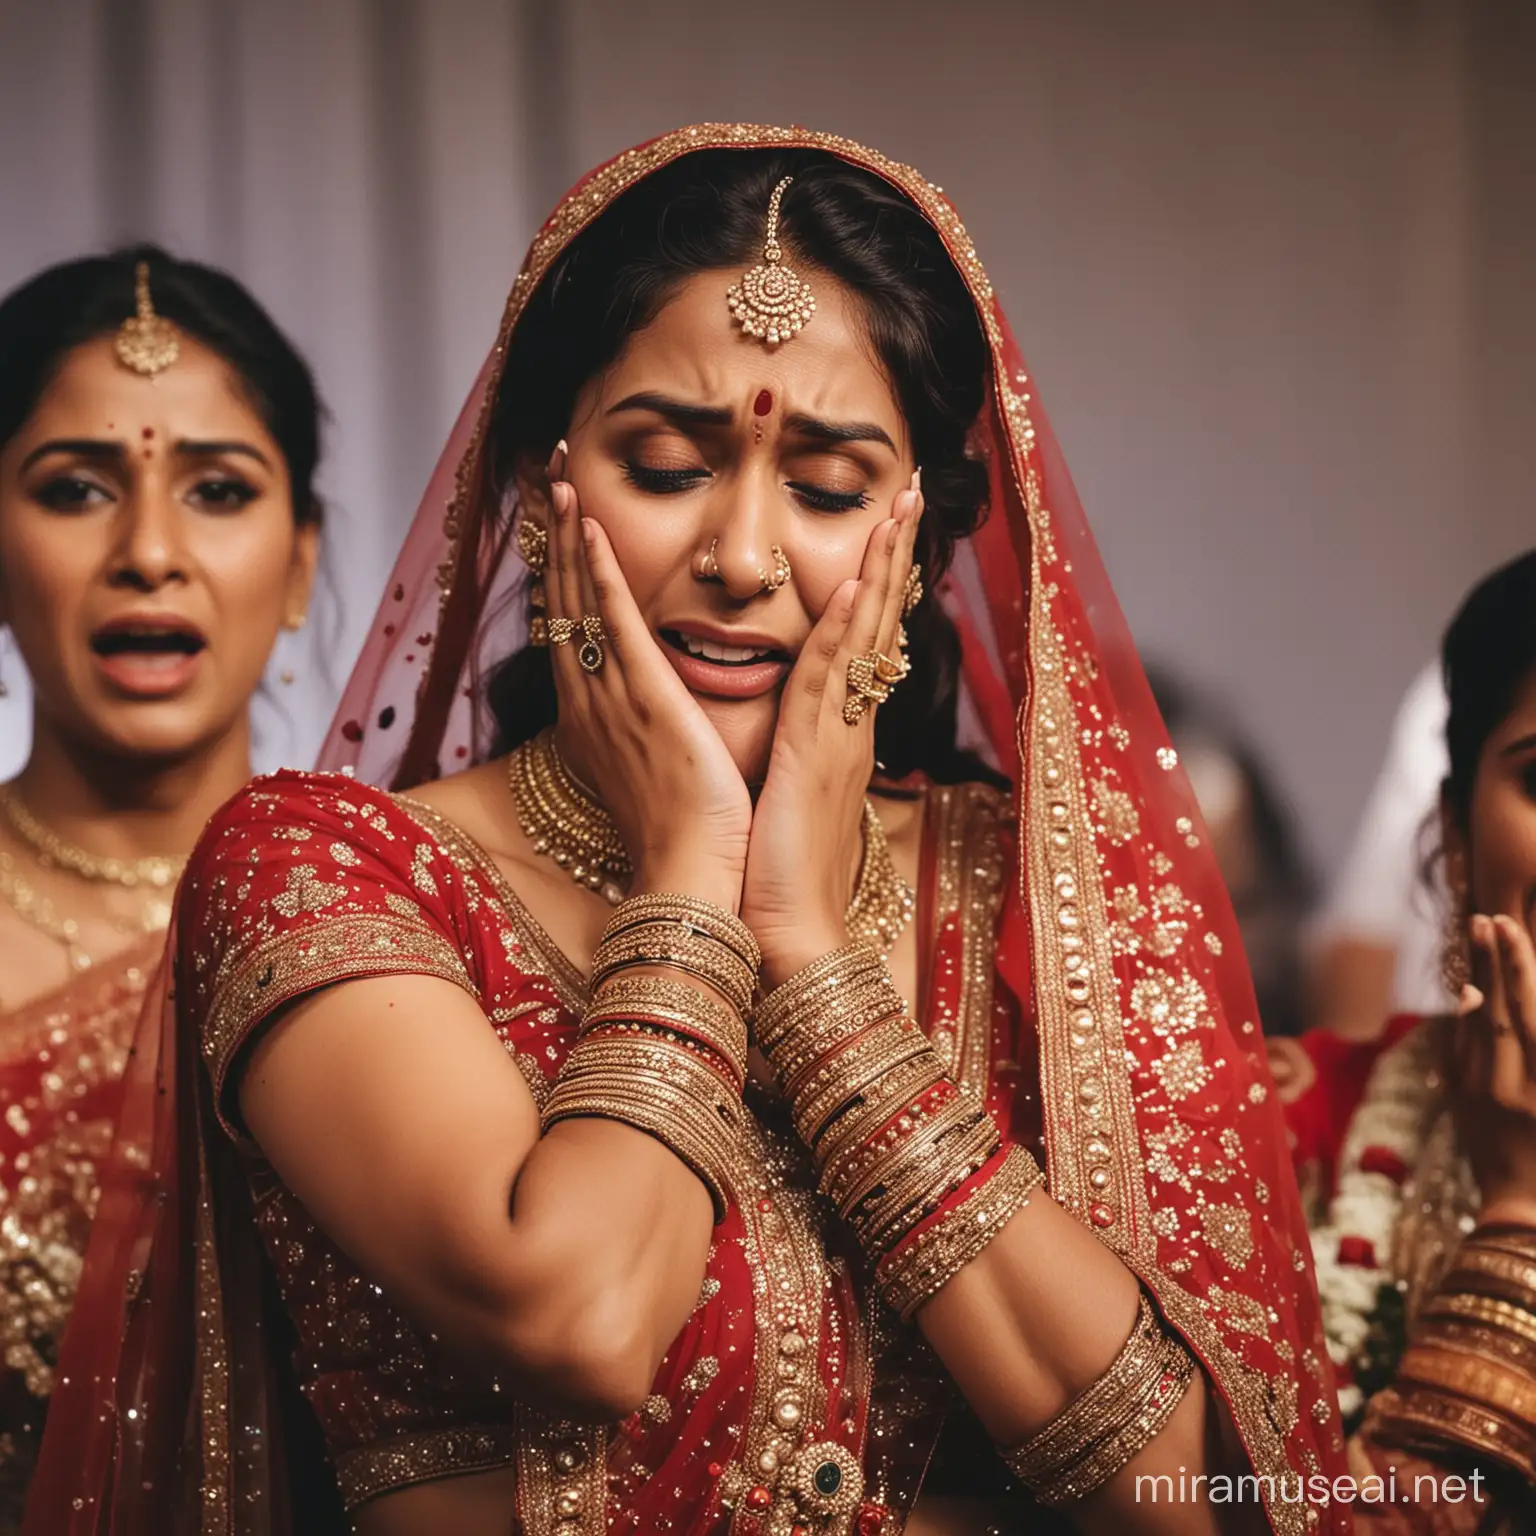 Indian Bride Crying with fear in the stage